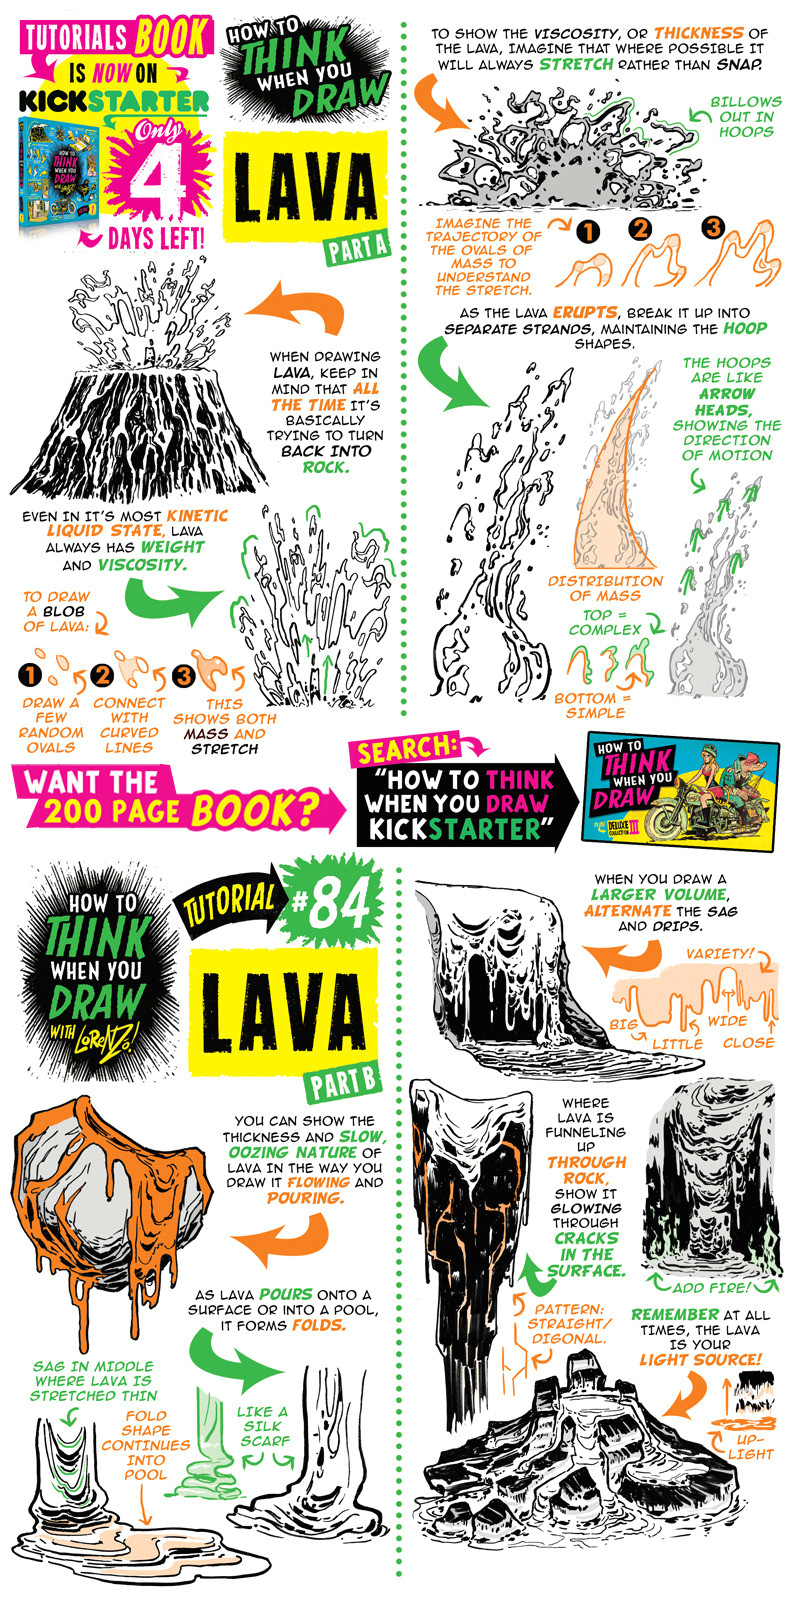 tutorials book kickstarter is ending soooon here s my how to think when you draw lava